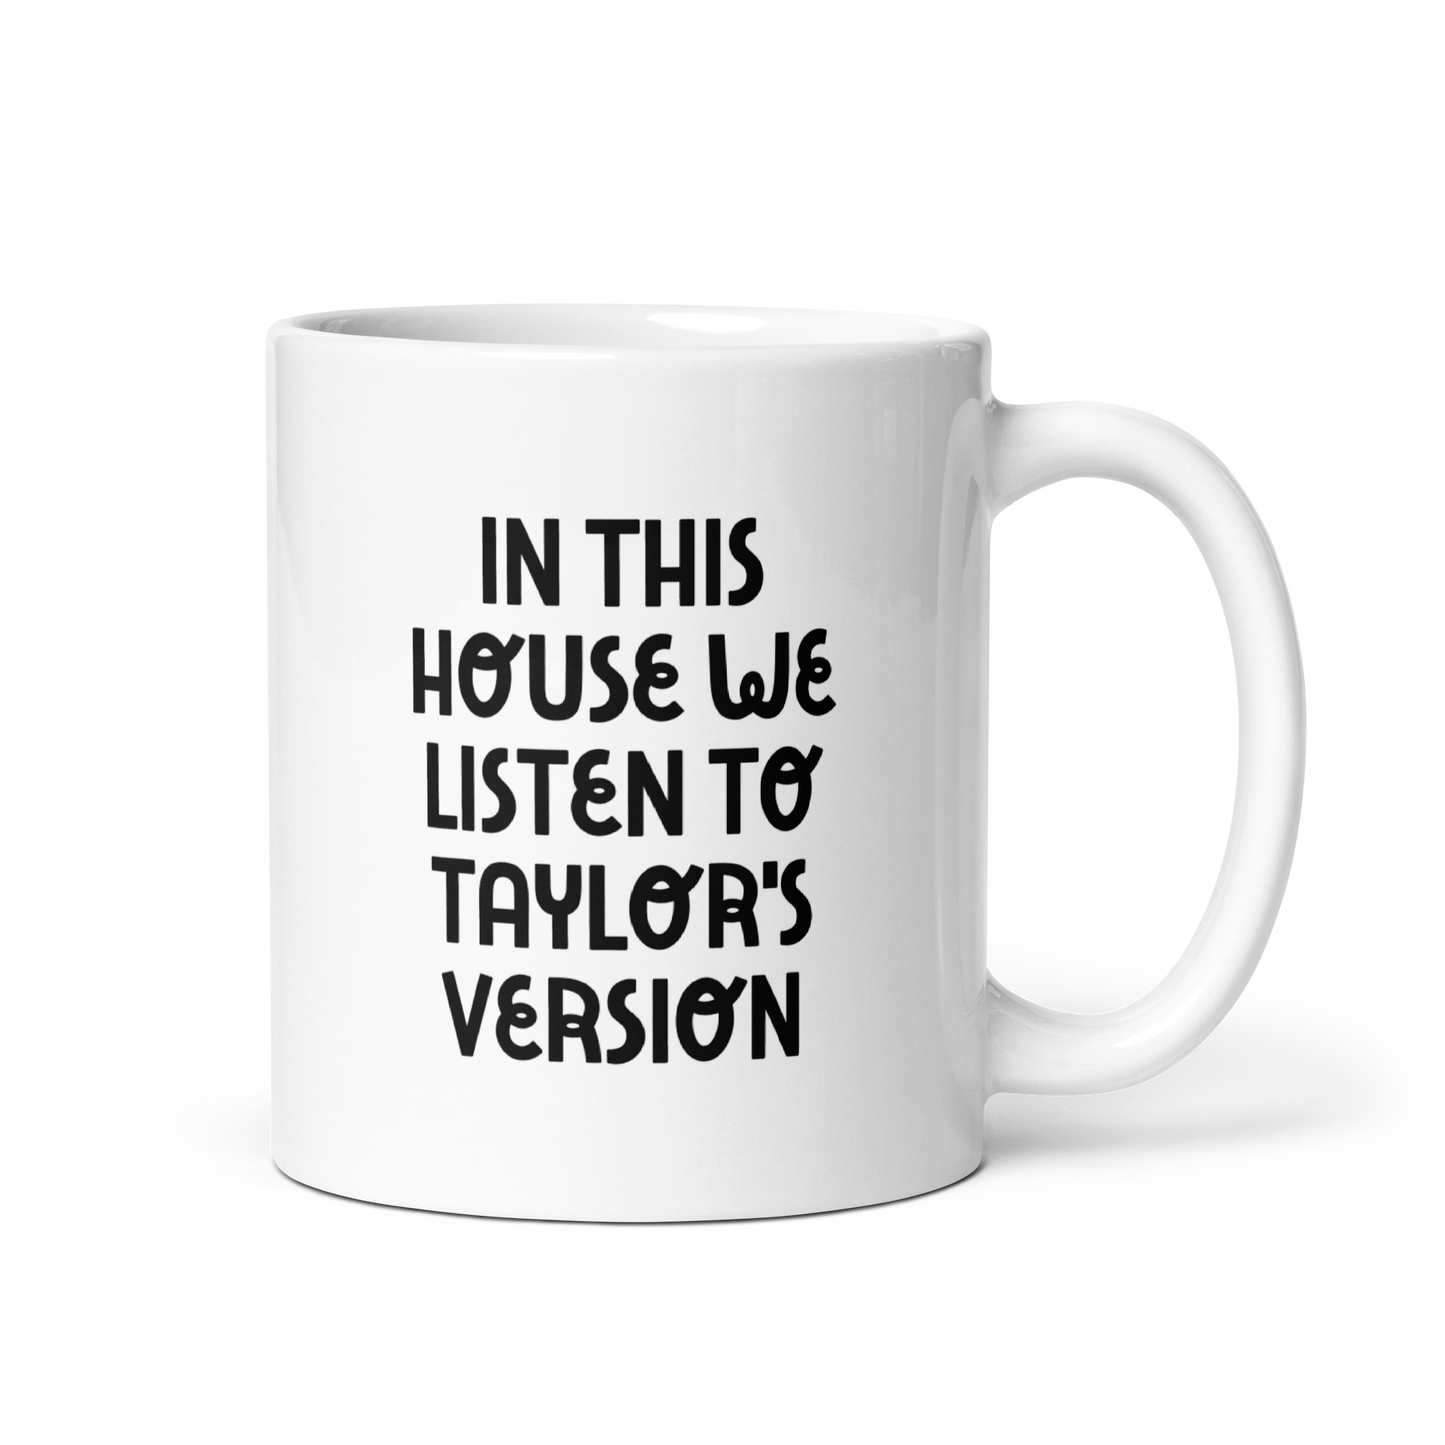 In This House we Listen to Taylor's Version Mug